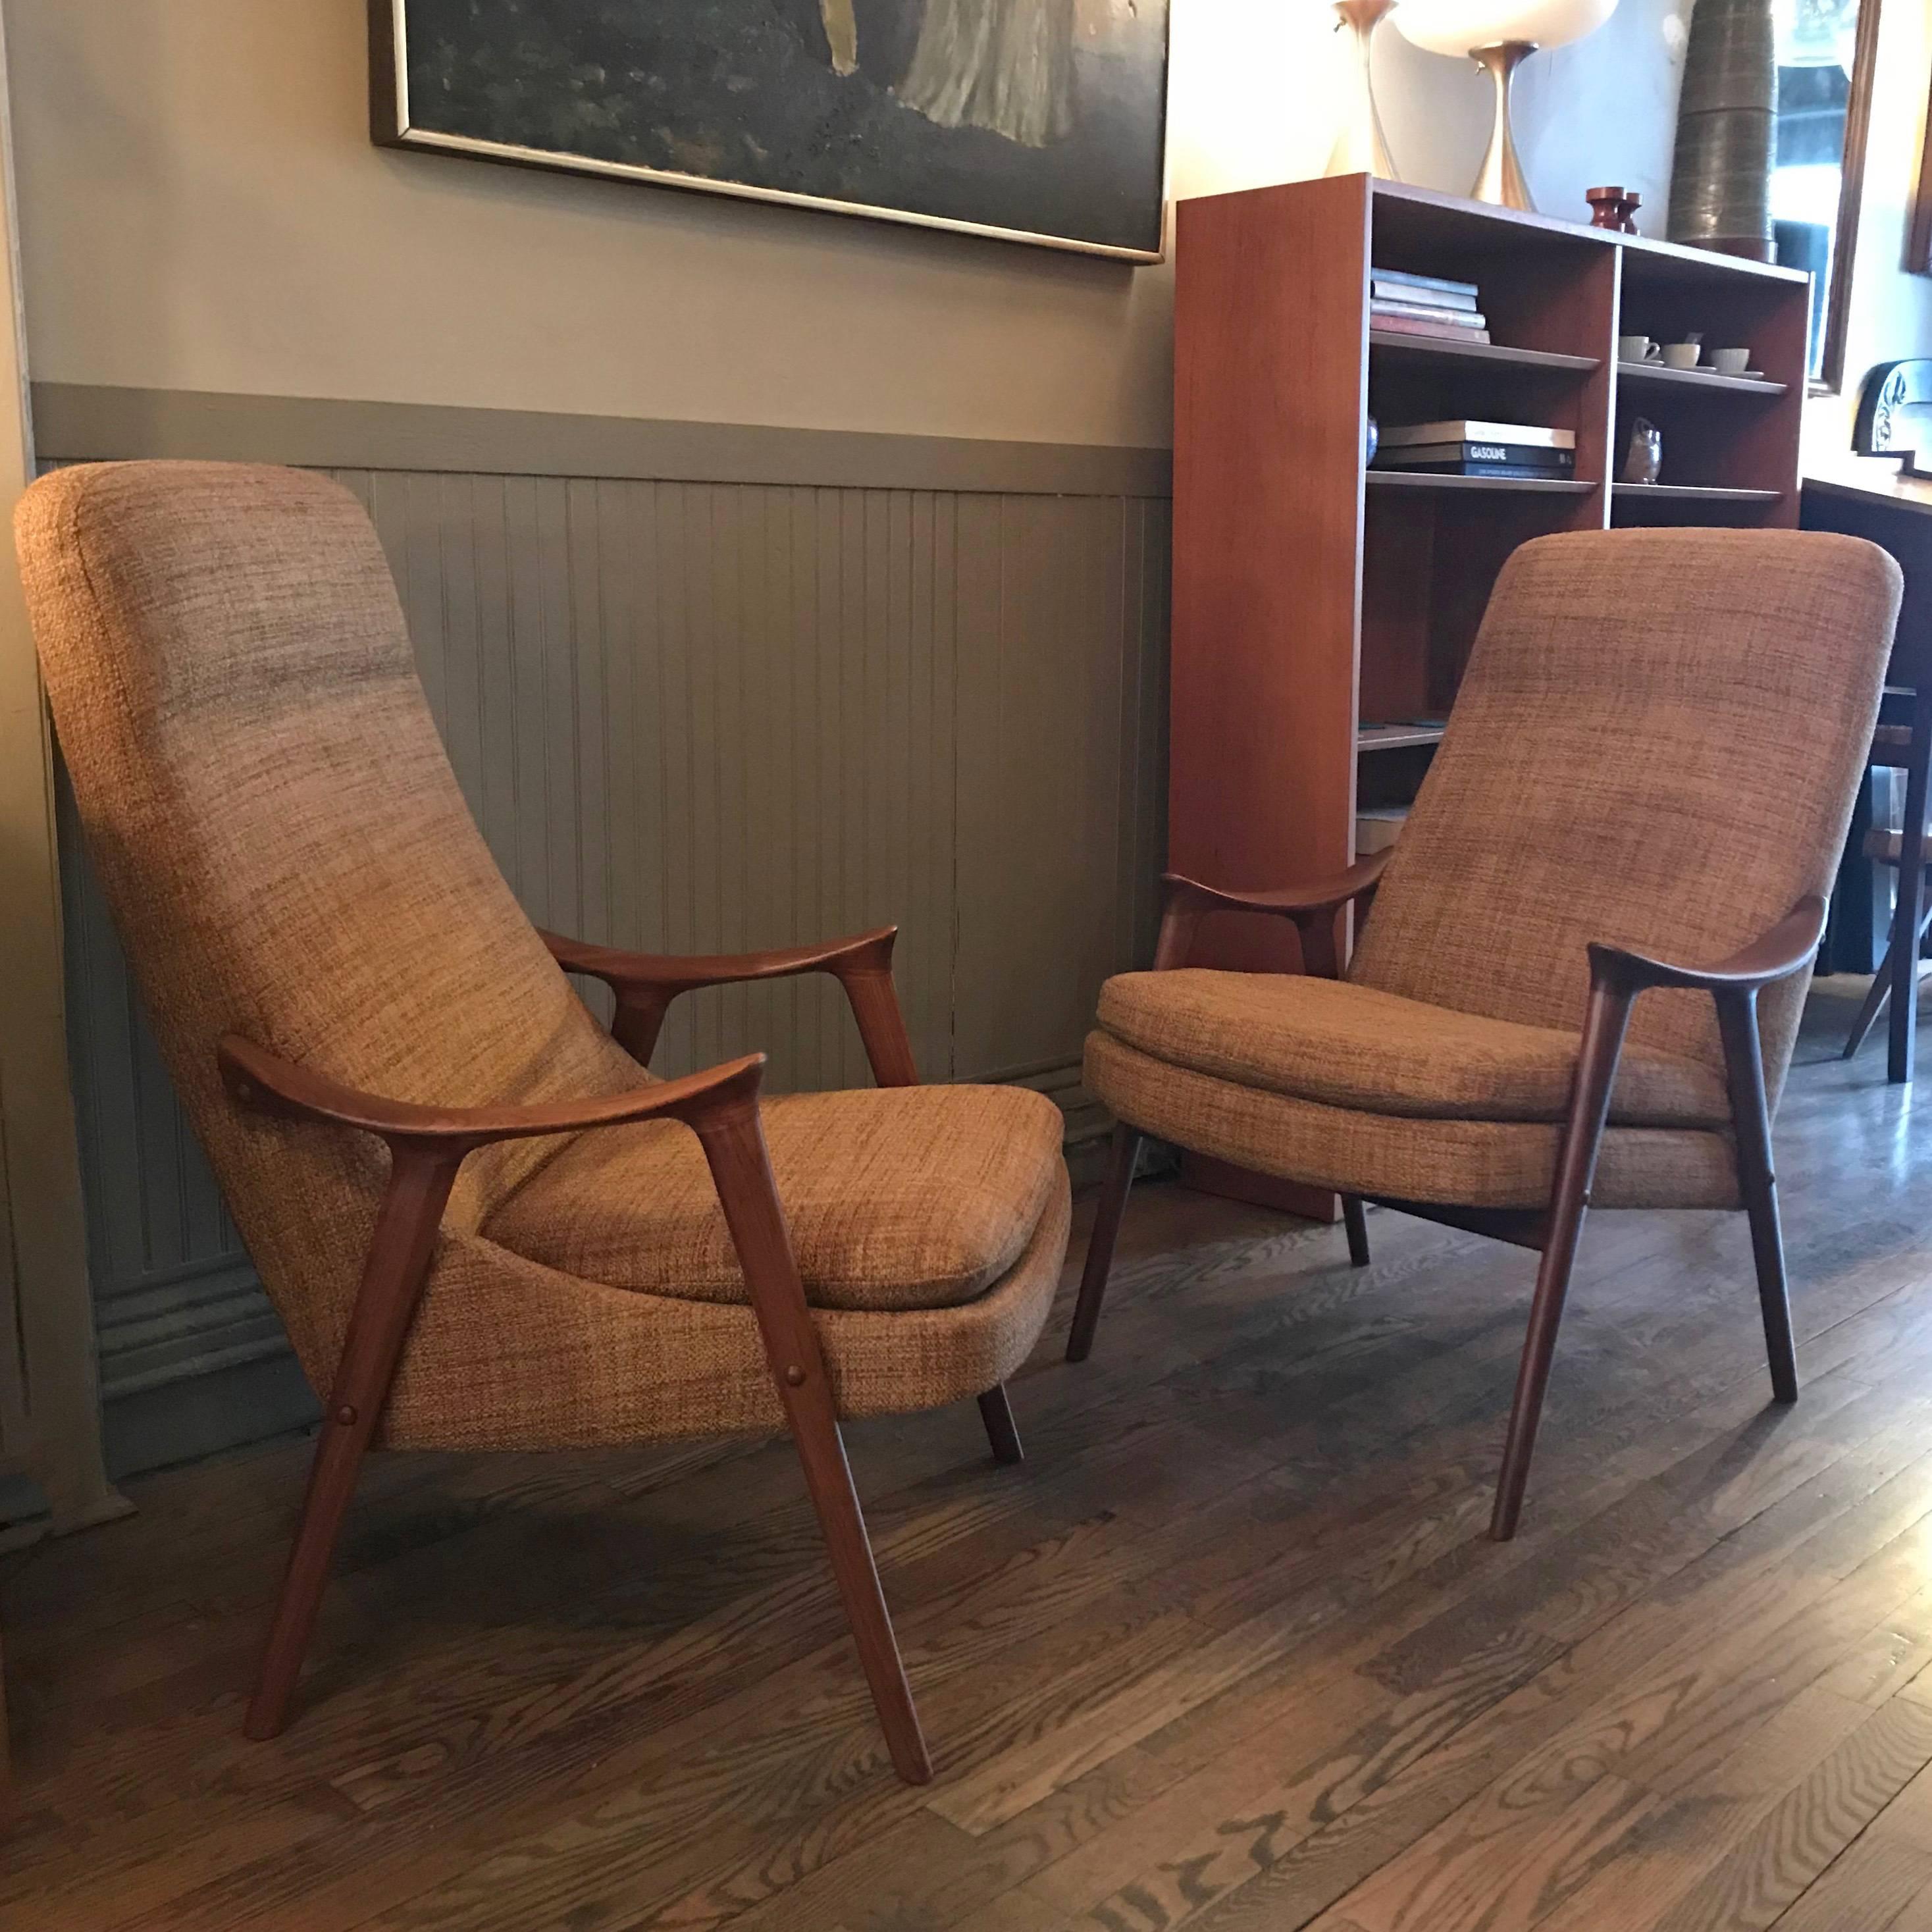 Pair of Scandinavian modern, high back, His and Hers lounge chairs designed by Ingmar Relling for Gustav Bahus and distributed by Westnofa, Norway. The chairs differ slightly and feature newly finished walnut frames with scoop arms and new